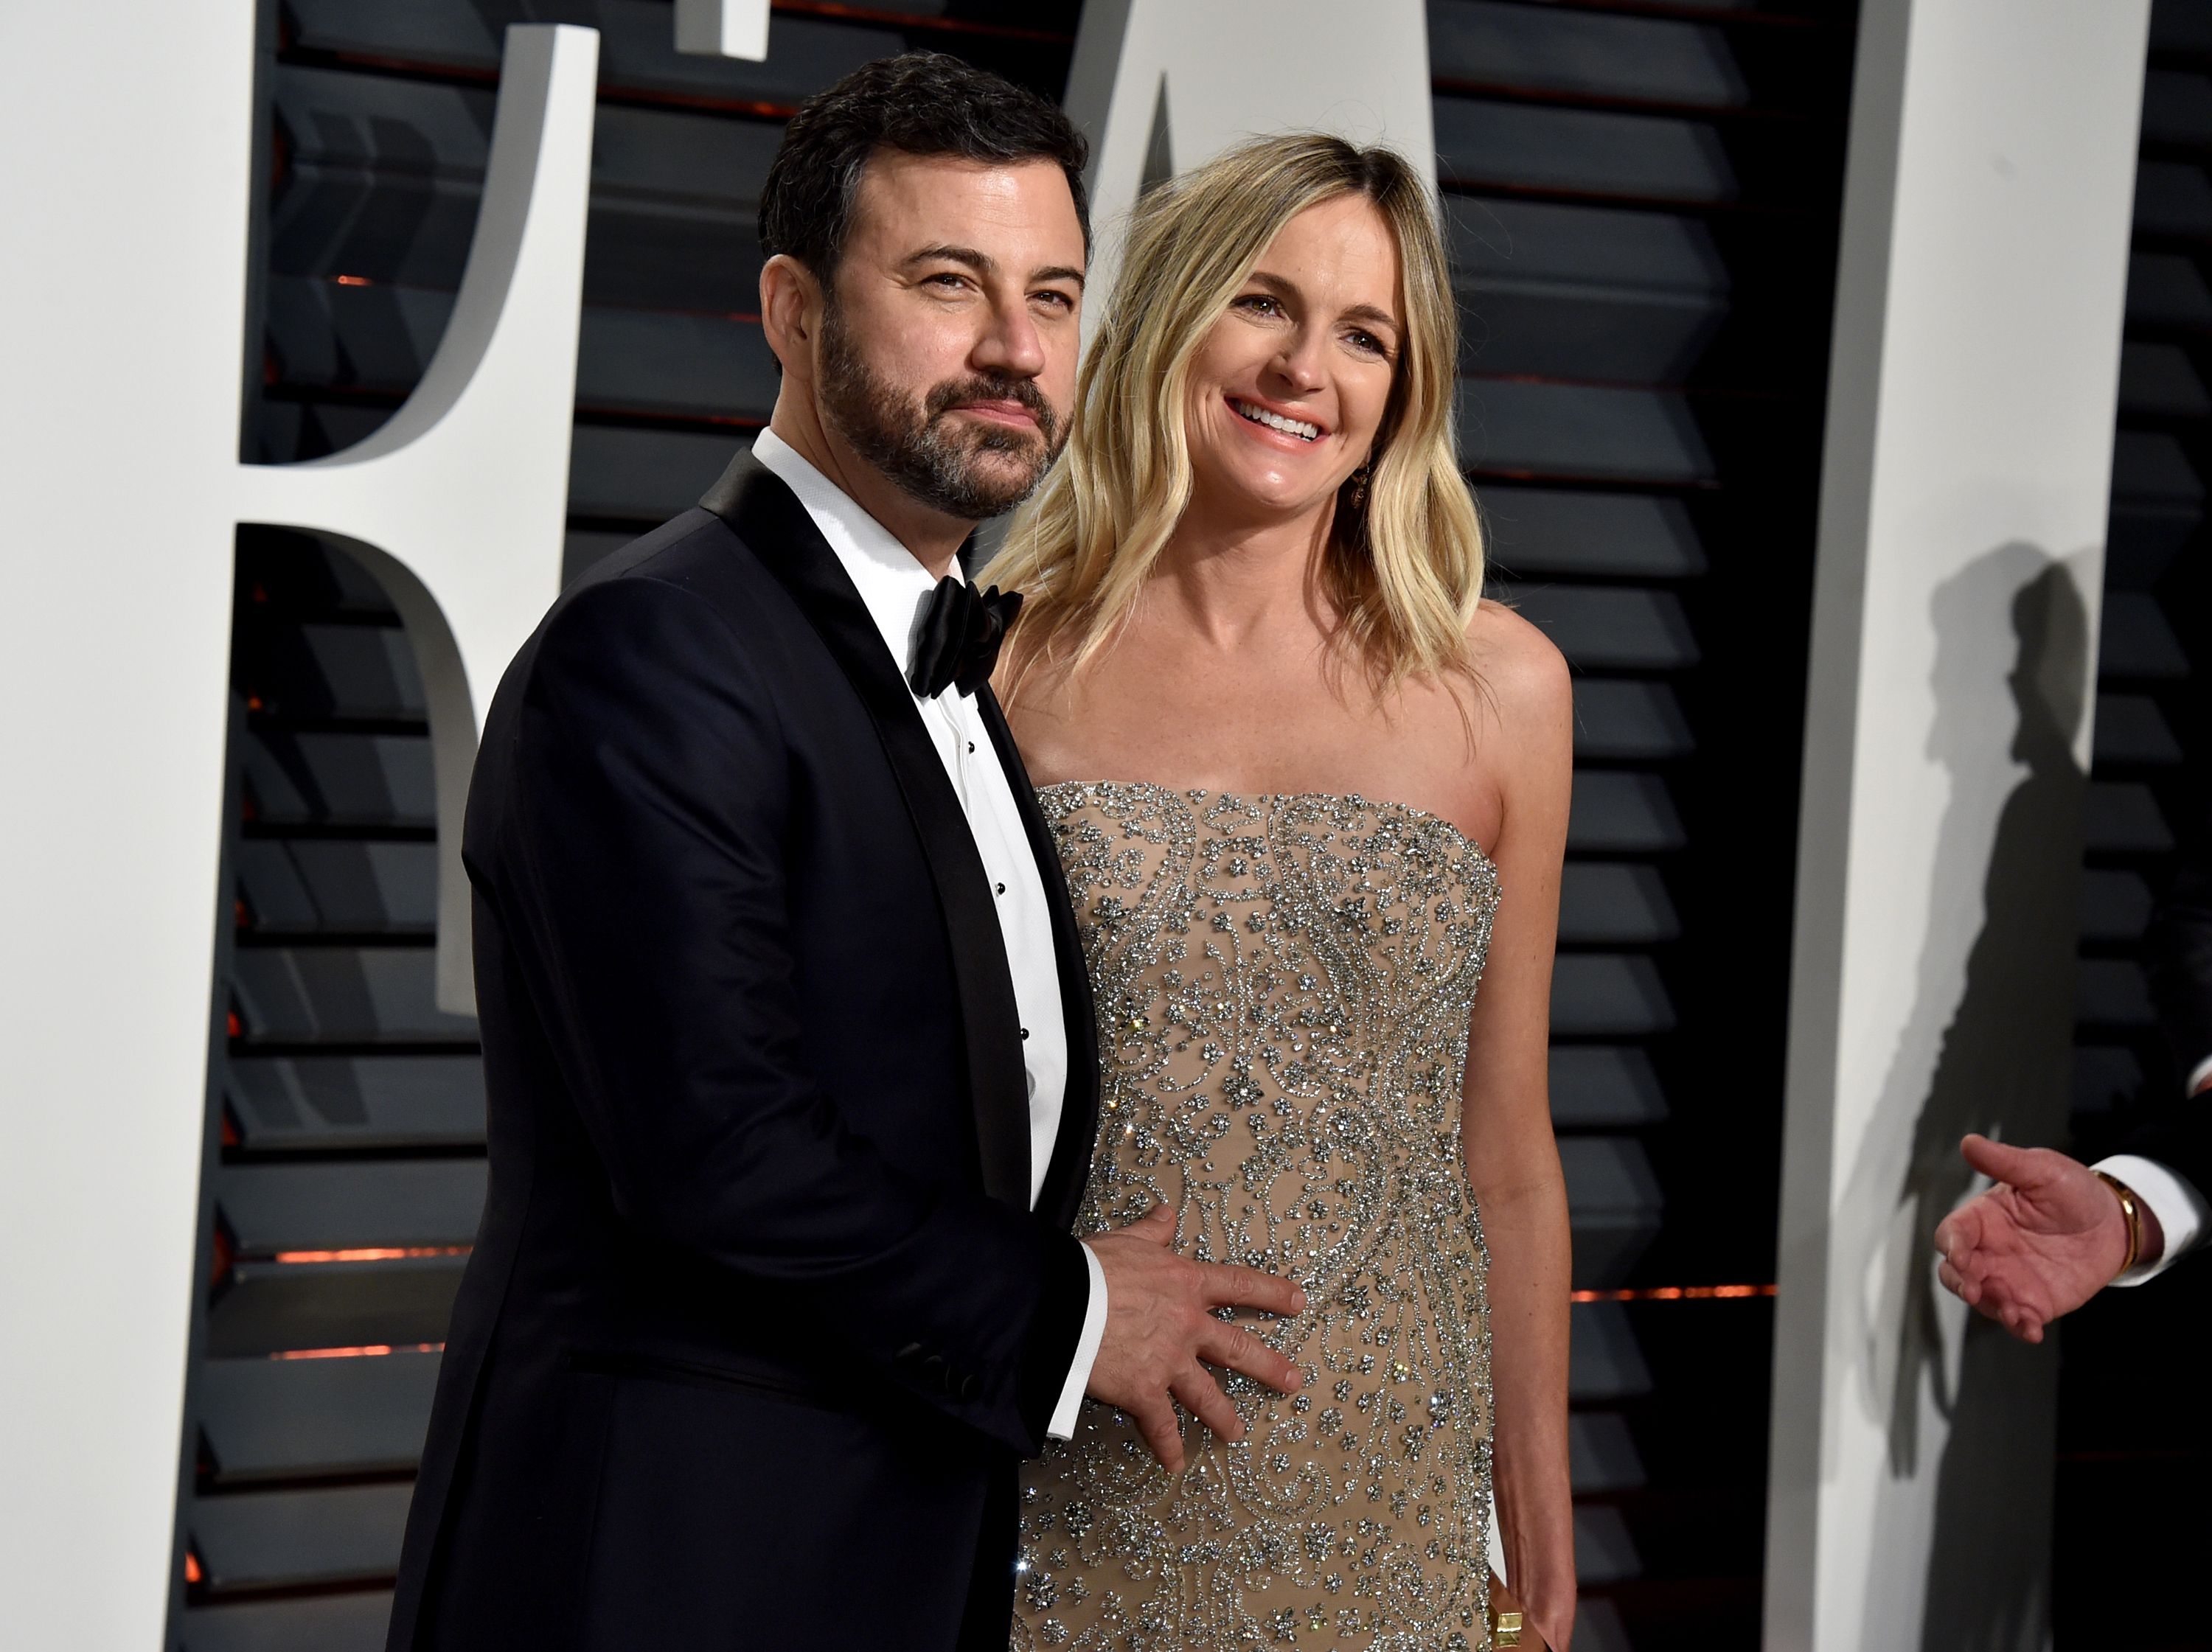 Jimmy Kimmel and Molly McNearney at the Vanity Fair Oscar Party hosted by Graydon Carter on February 26, 2017, in Beverly Hills, California | Photo: John Shearer/Getty Images